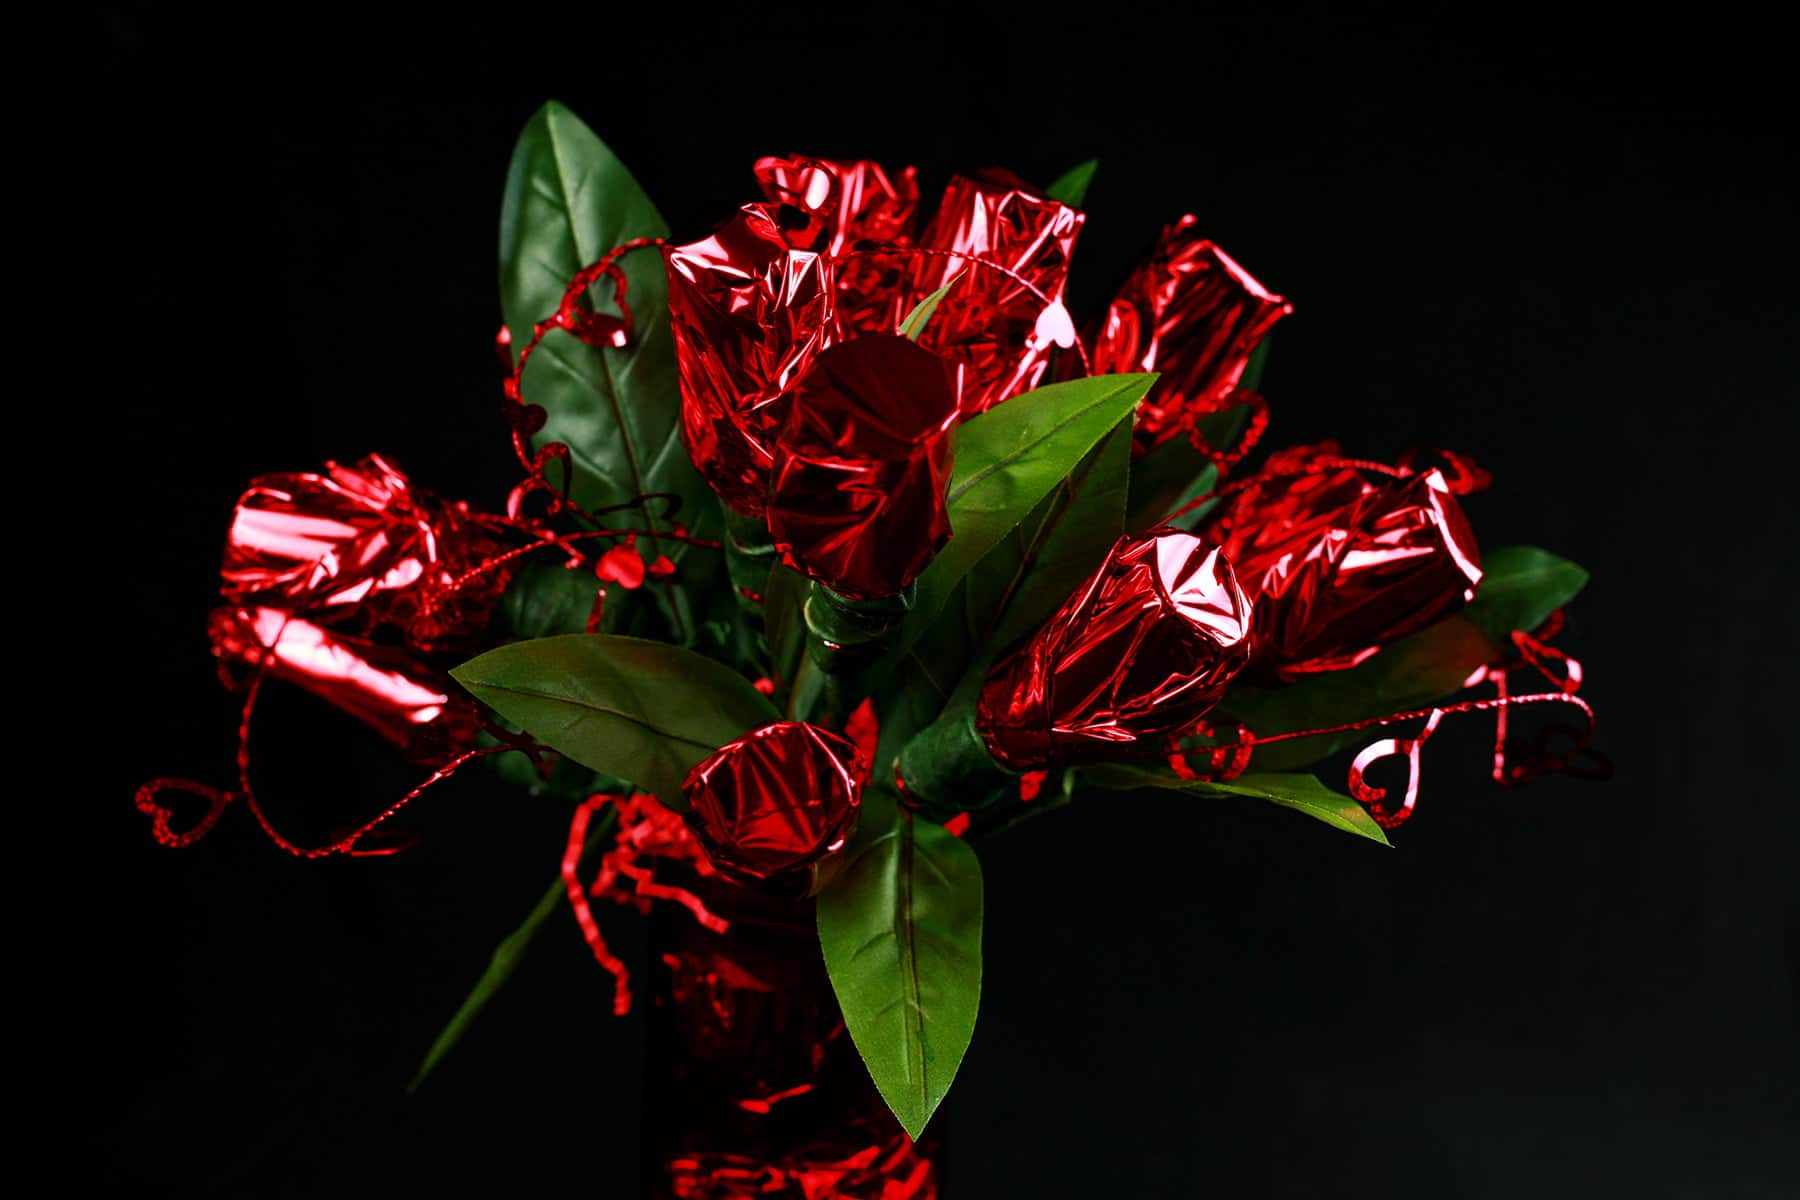 A bouquet made of mini liquor bottles.  Each is wrapped in red mylar to look like a rose.